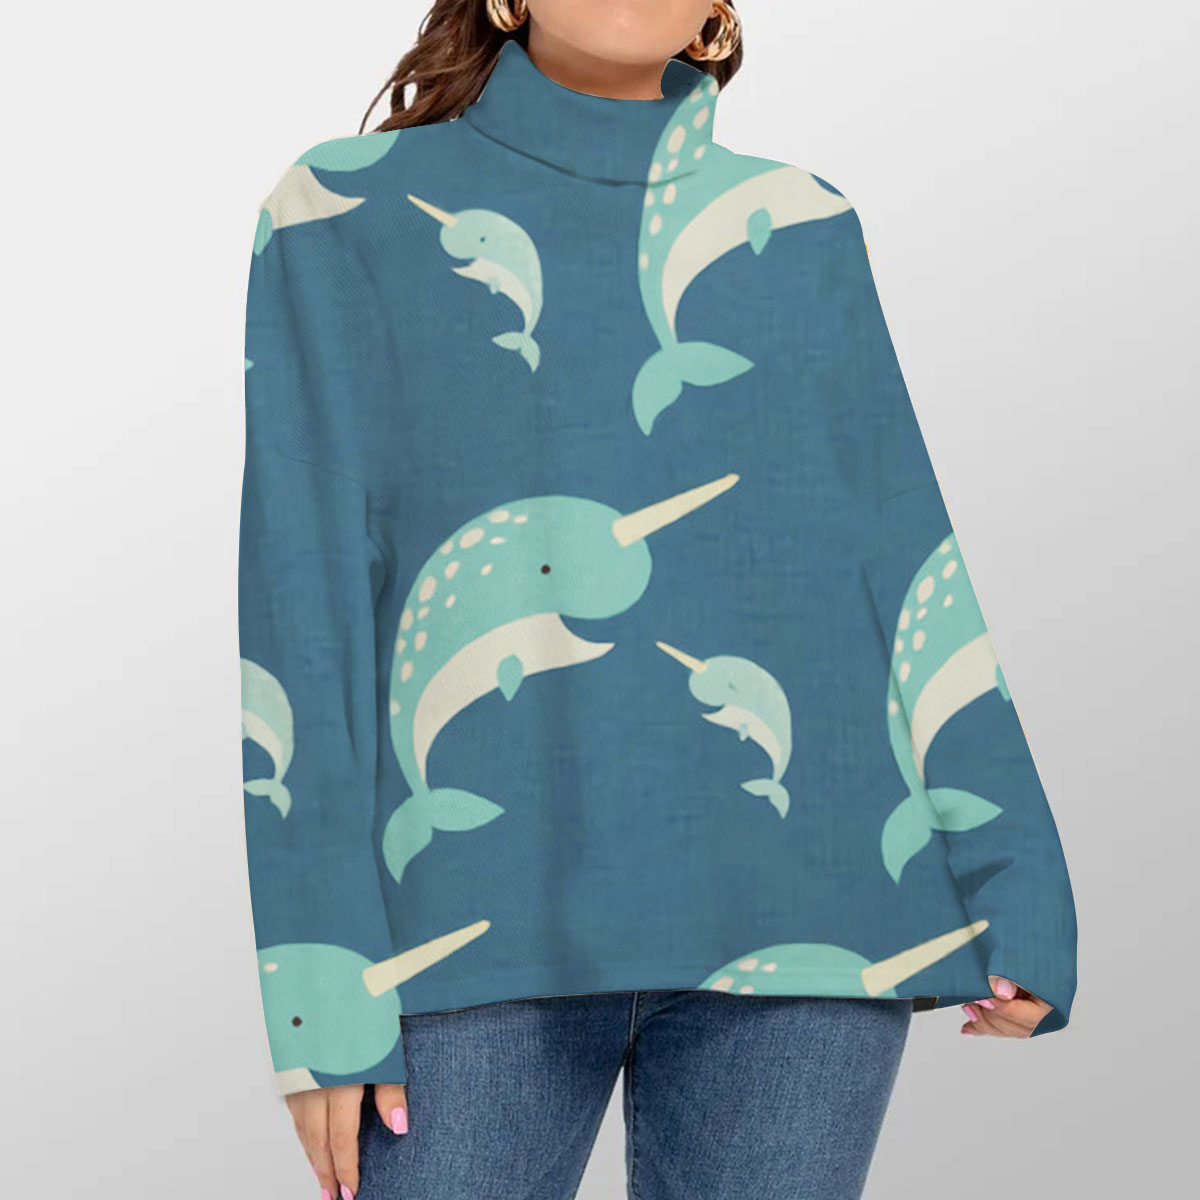 Big And Small Narwhal Turtleneck Sweater